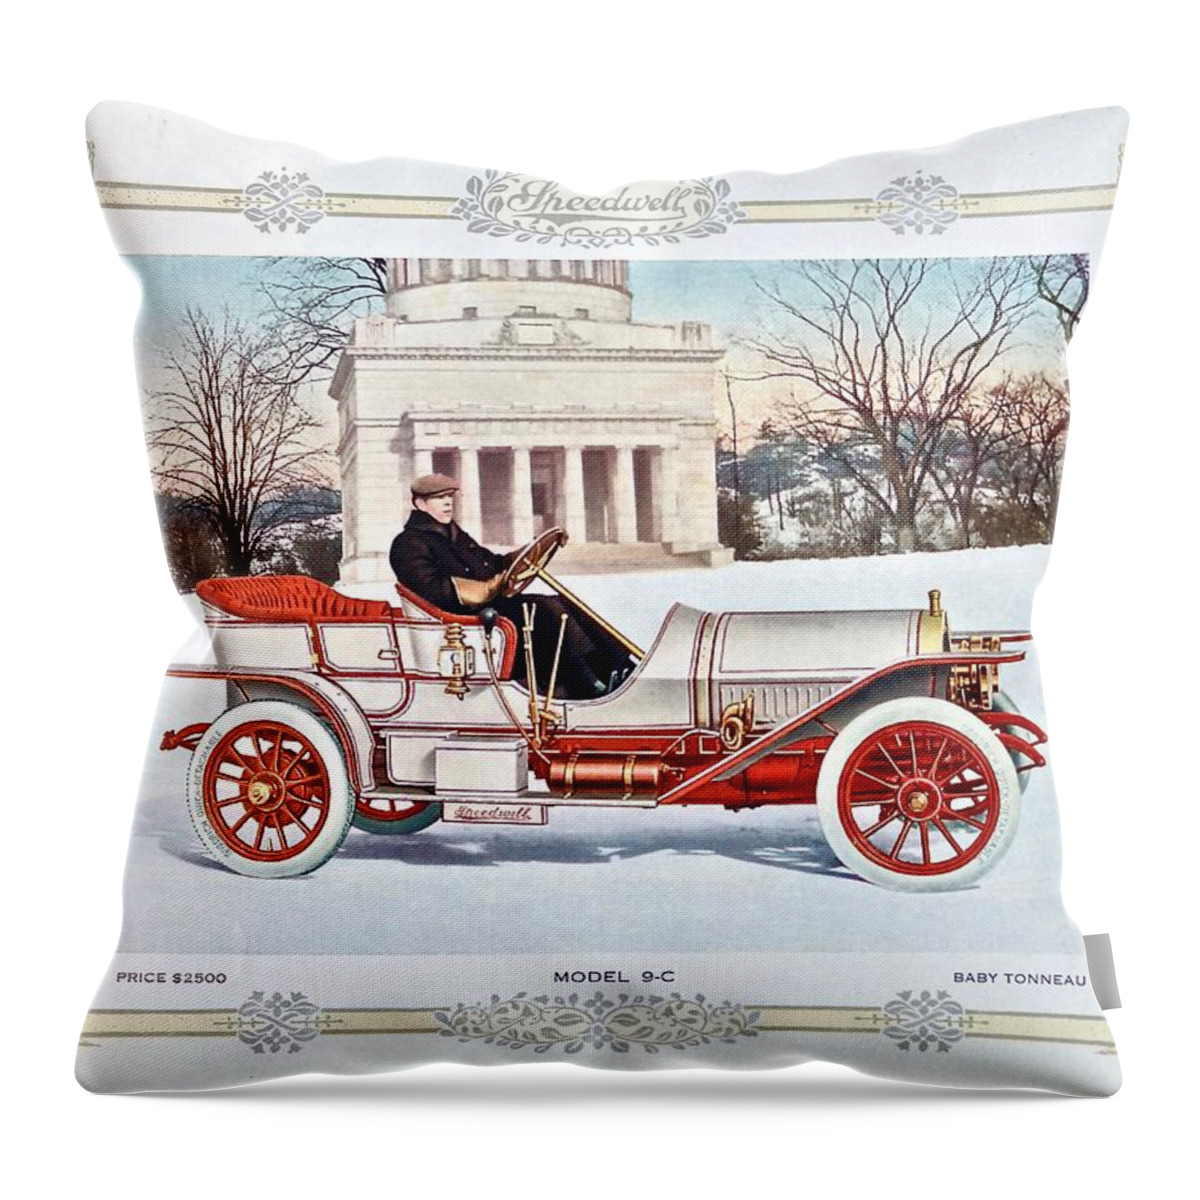 Speedwell Cars Throw Pillow featuring the photograph 1912 Speedwell Model 9-C by Ira Shander